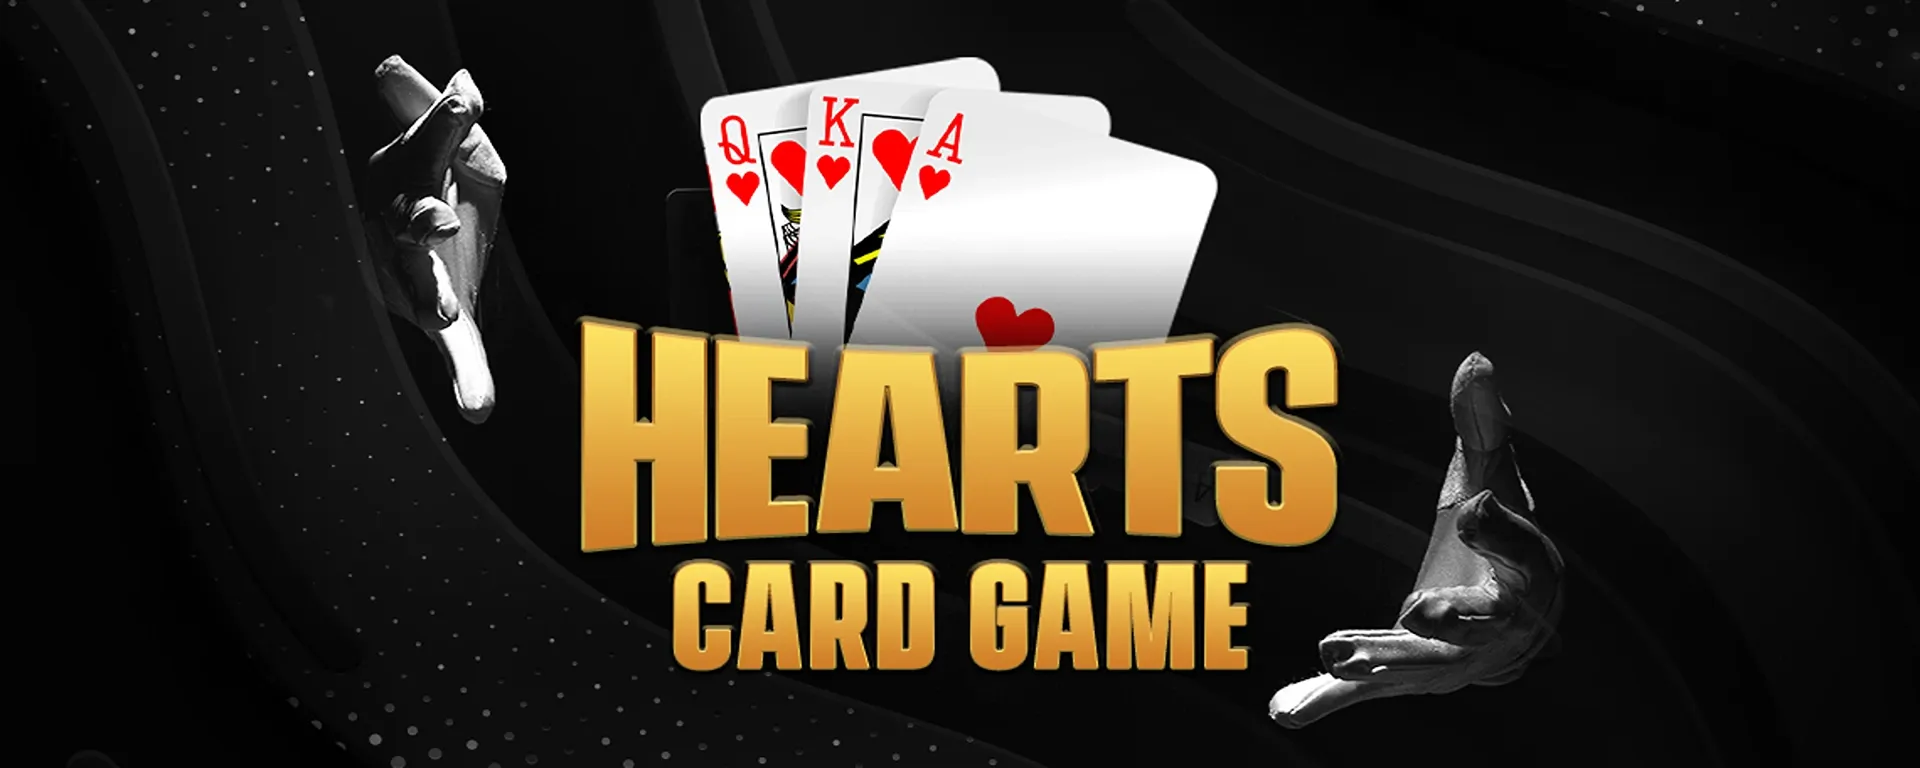 Hearts Card Game   Play Online